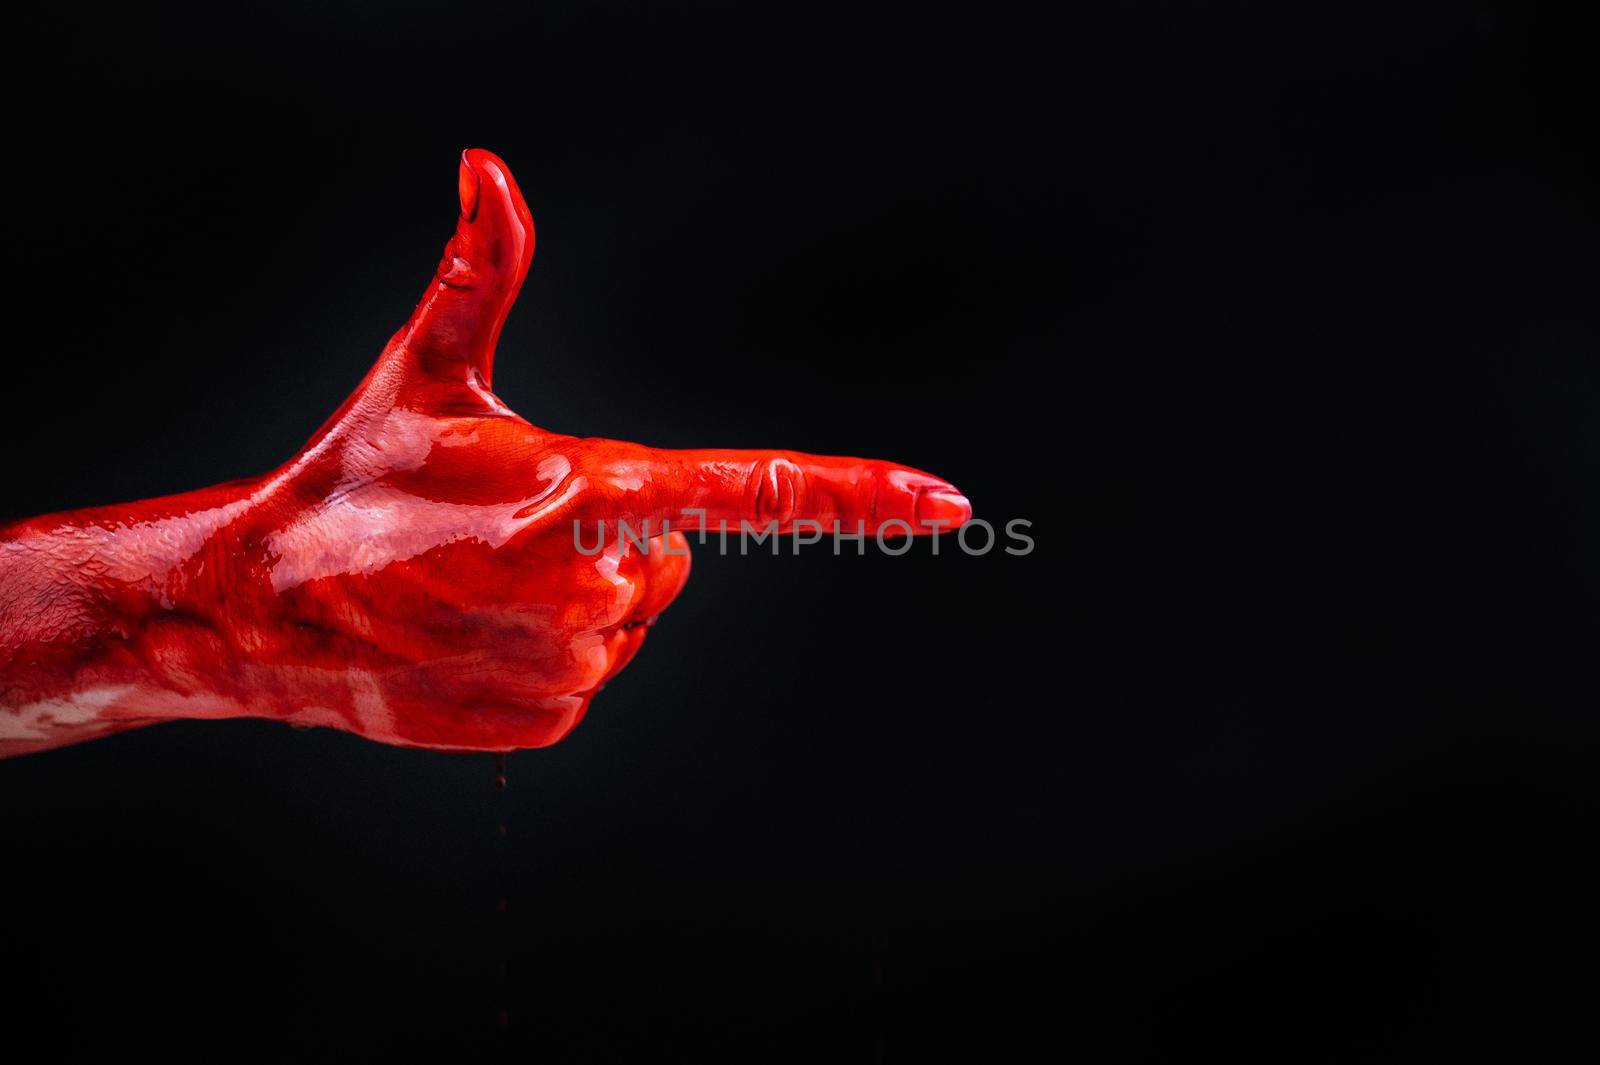 Woman's hand in blood shows a gesture of a gun on a black background. by mrwed54